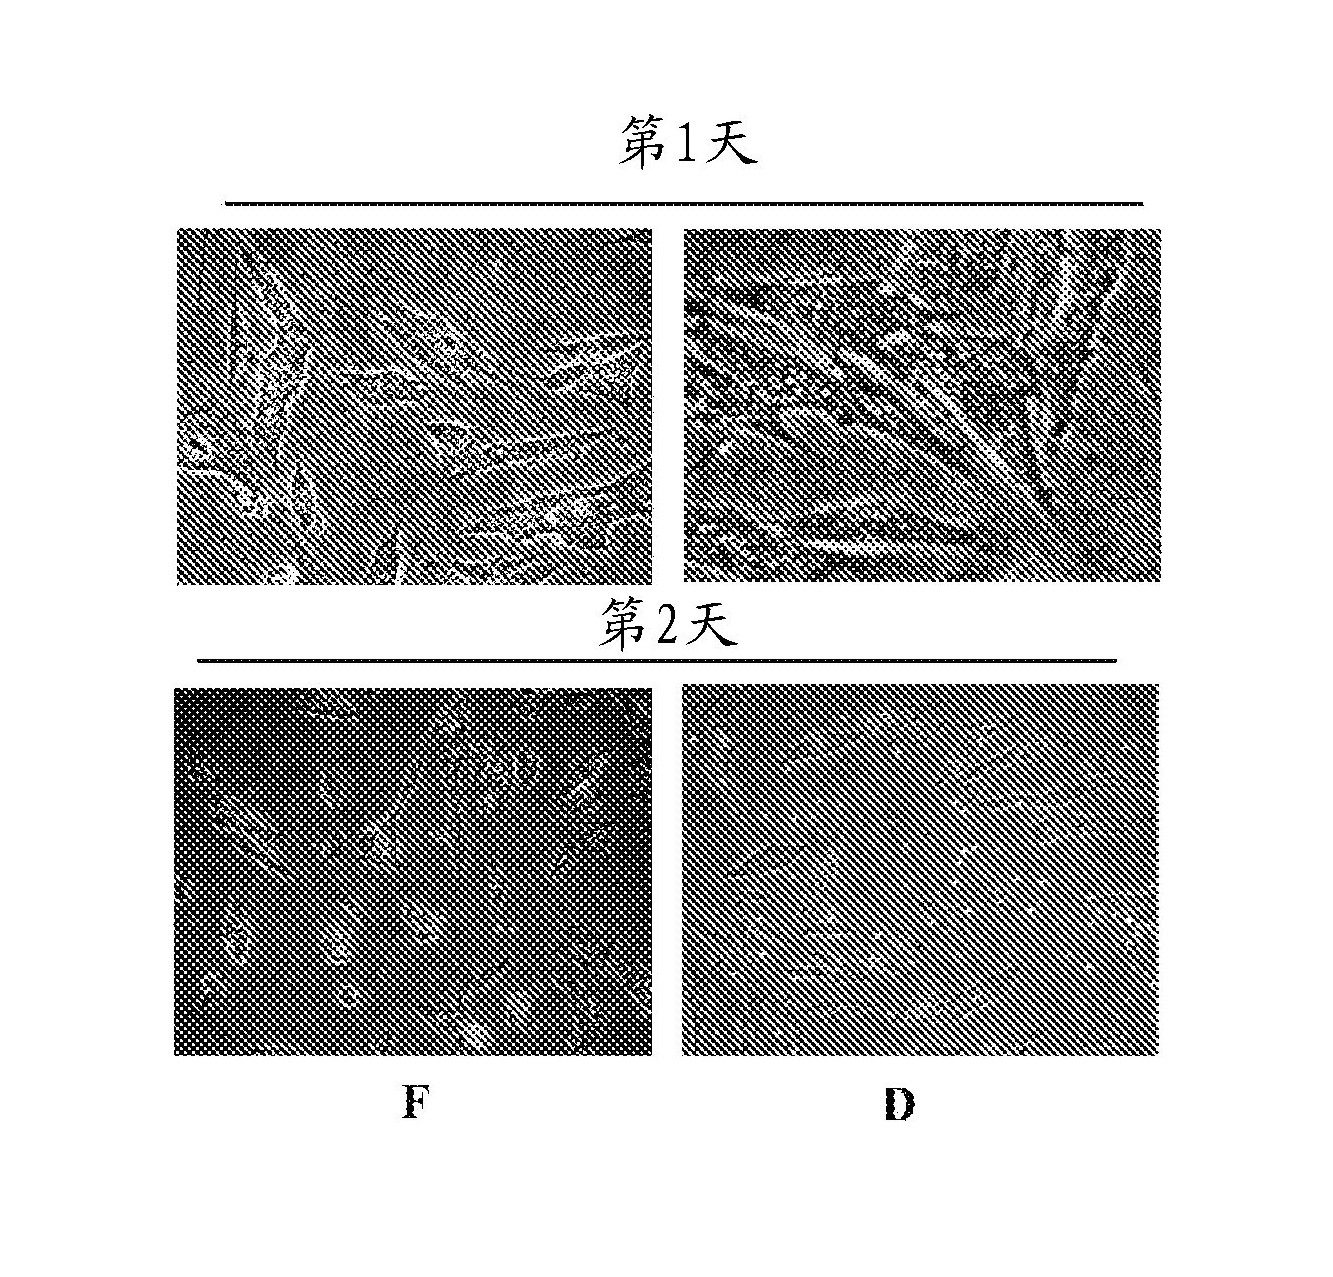 Method and composition for restoration of age-related tissue loss in the face or selected areas of the body